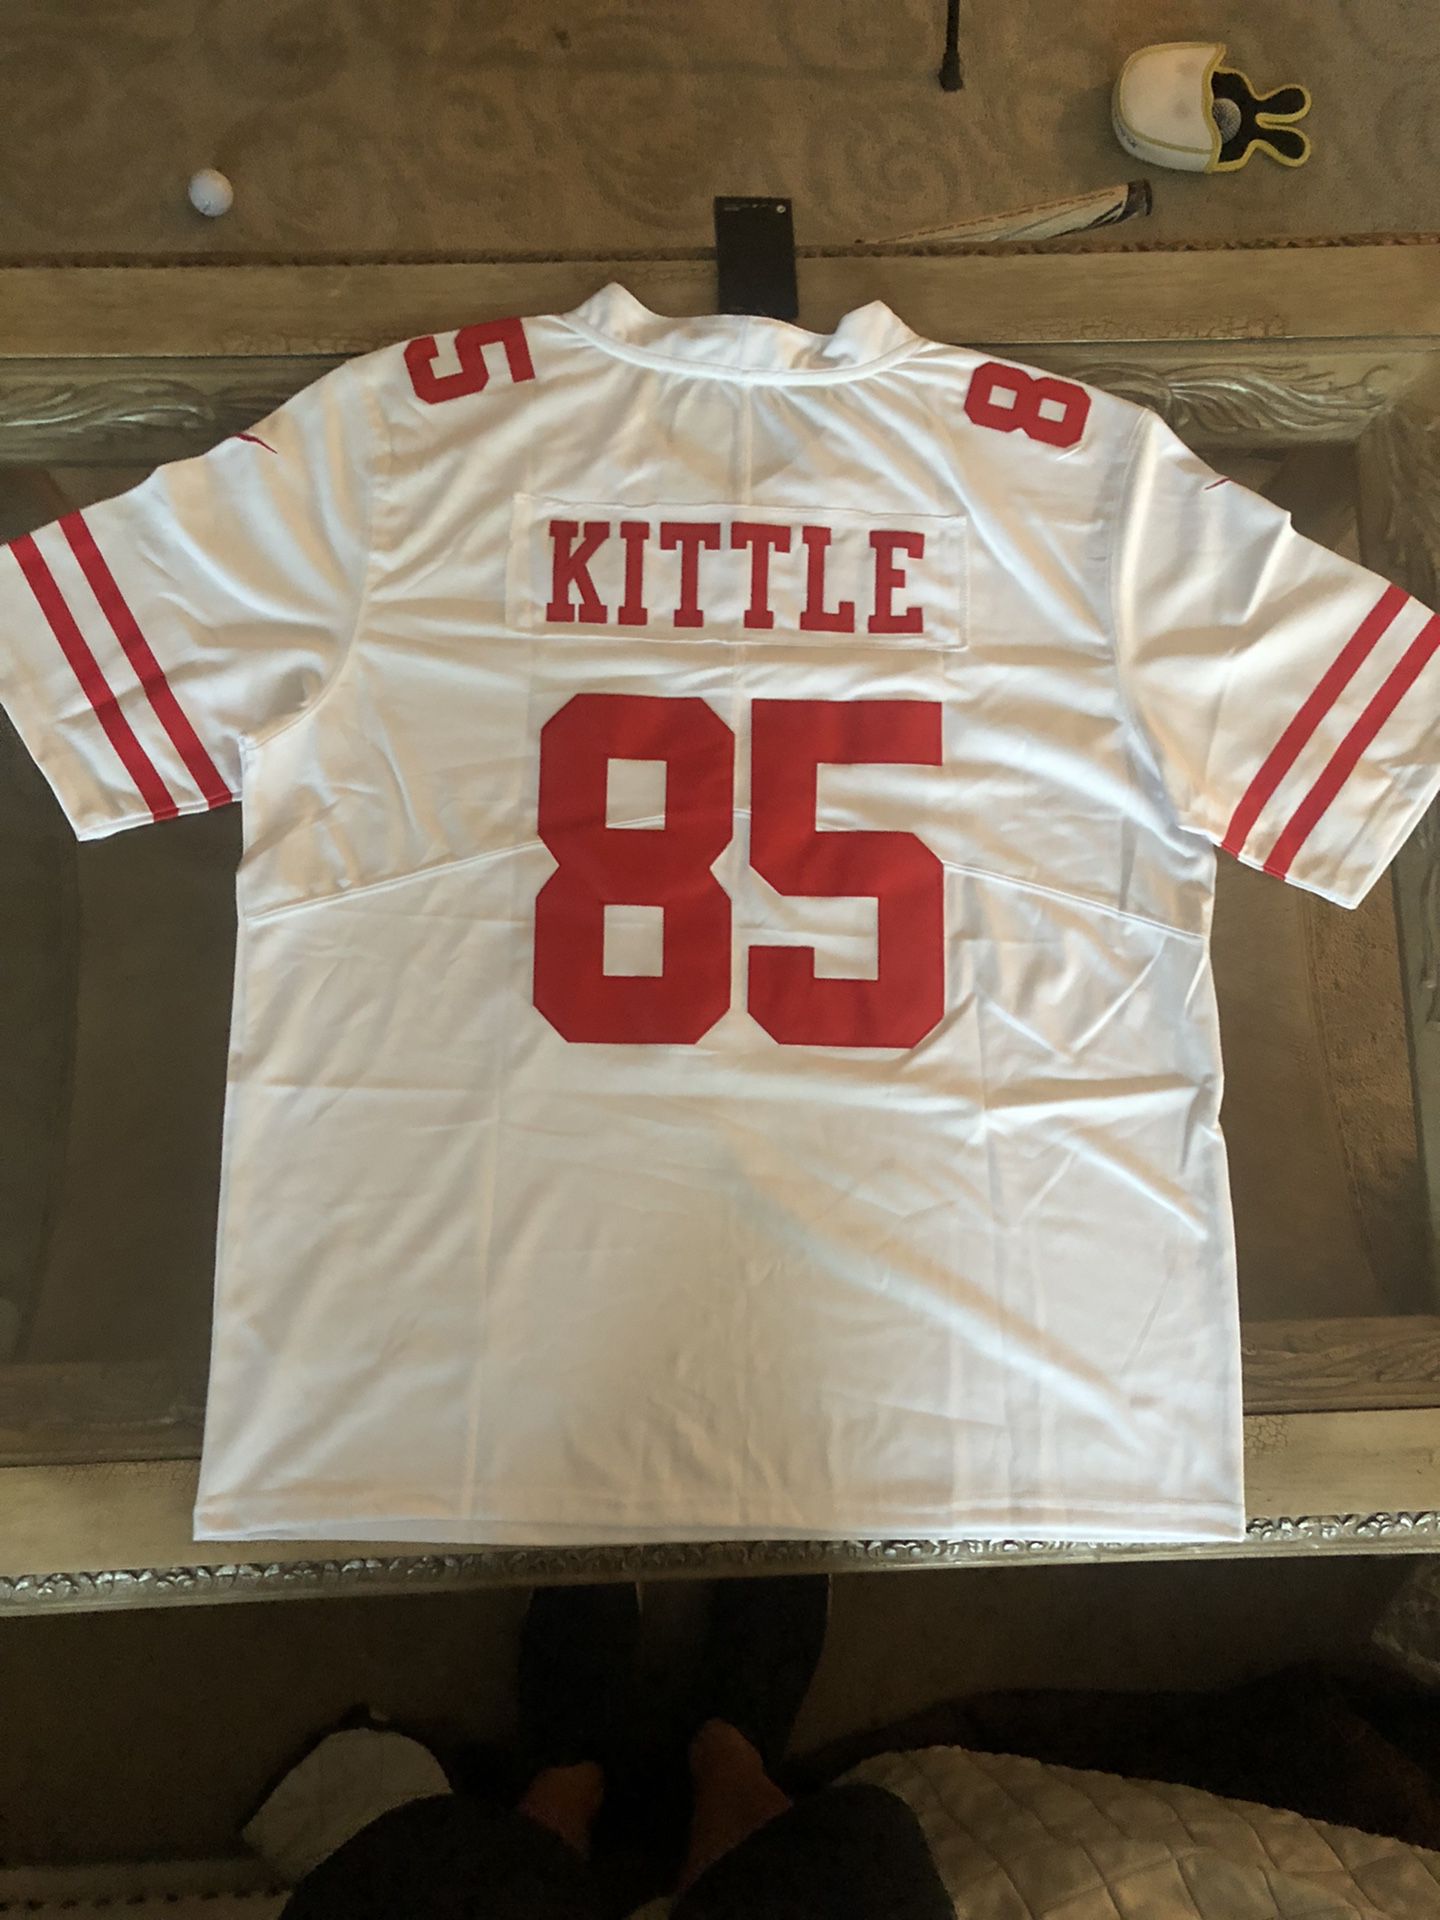 george kittle jersey mens